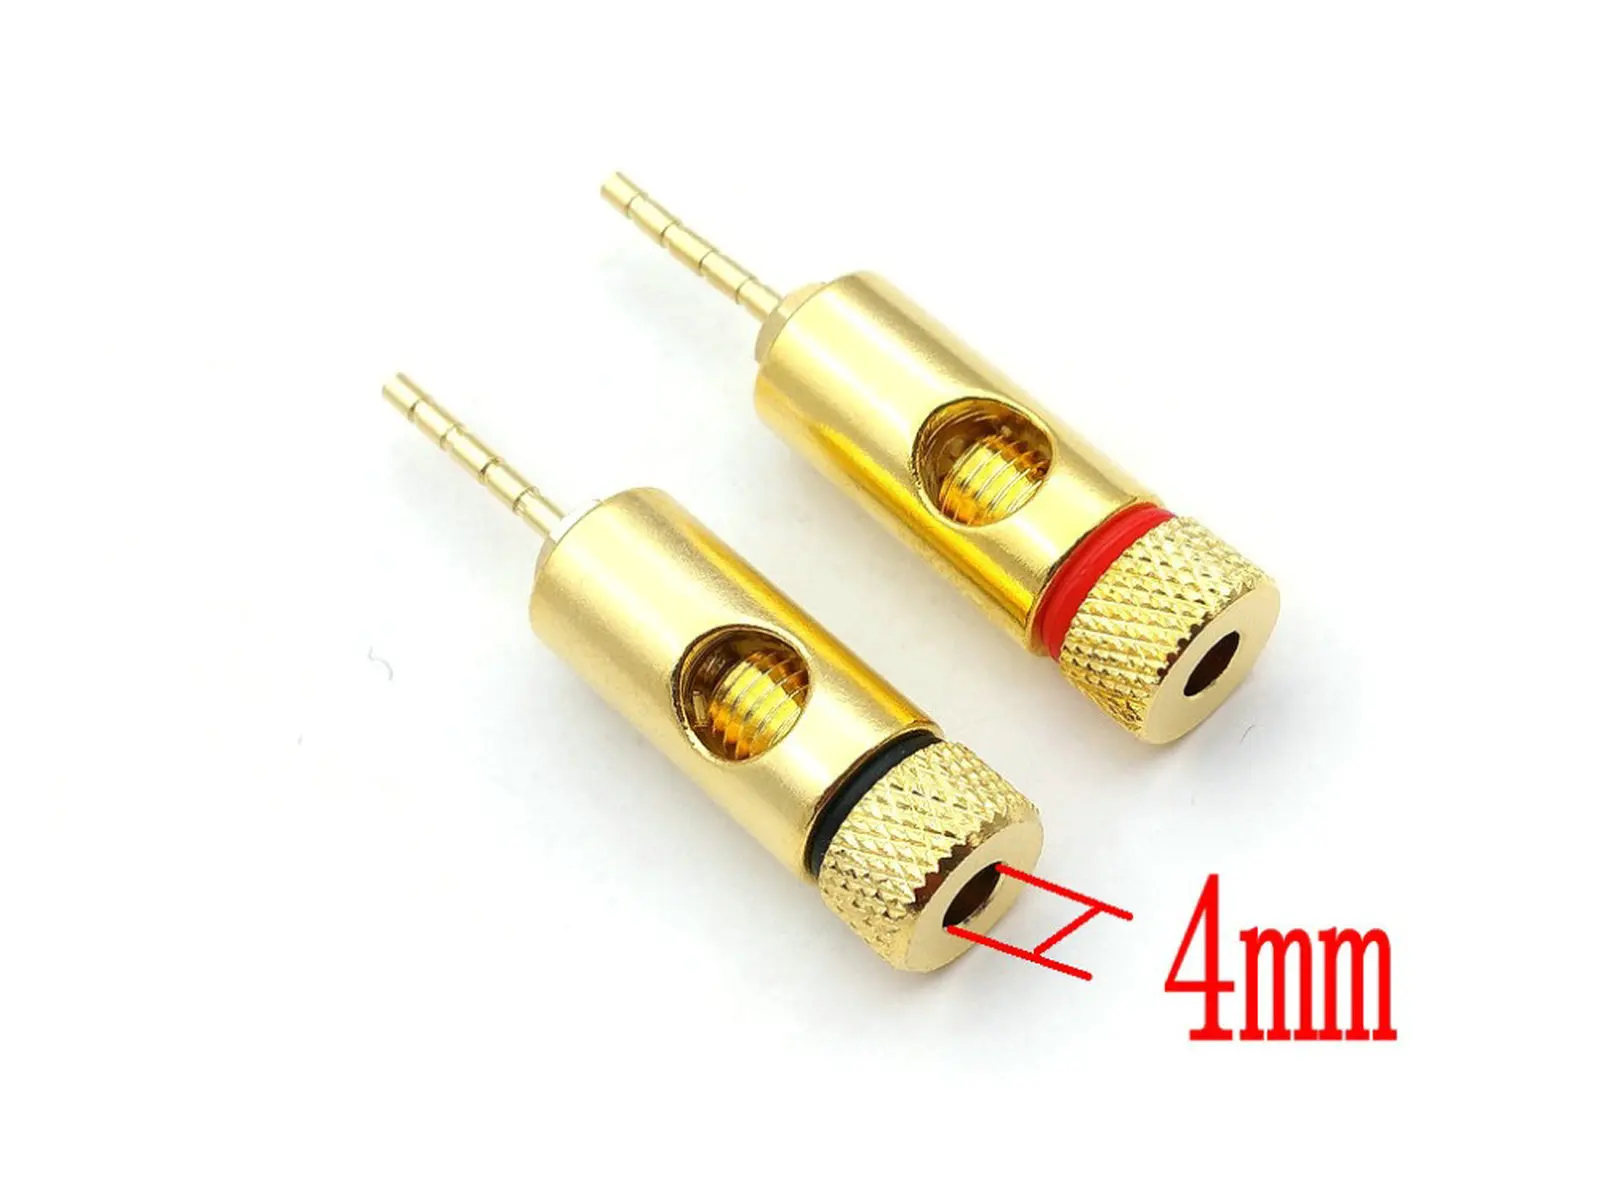 2pcs-copper-speaker-wire-pin-for-4mm-banana-plugs-spade-bnanana-to-pin-adapter